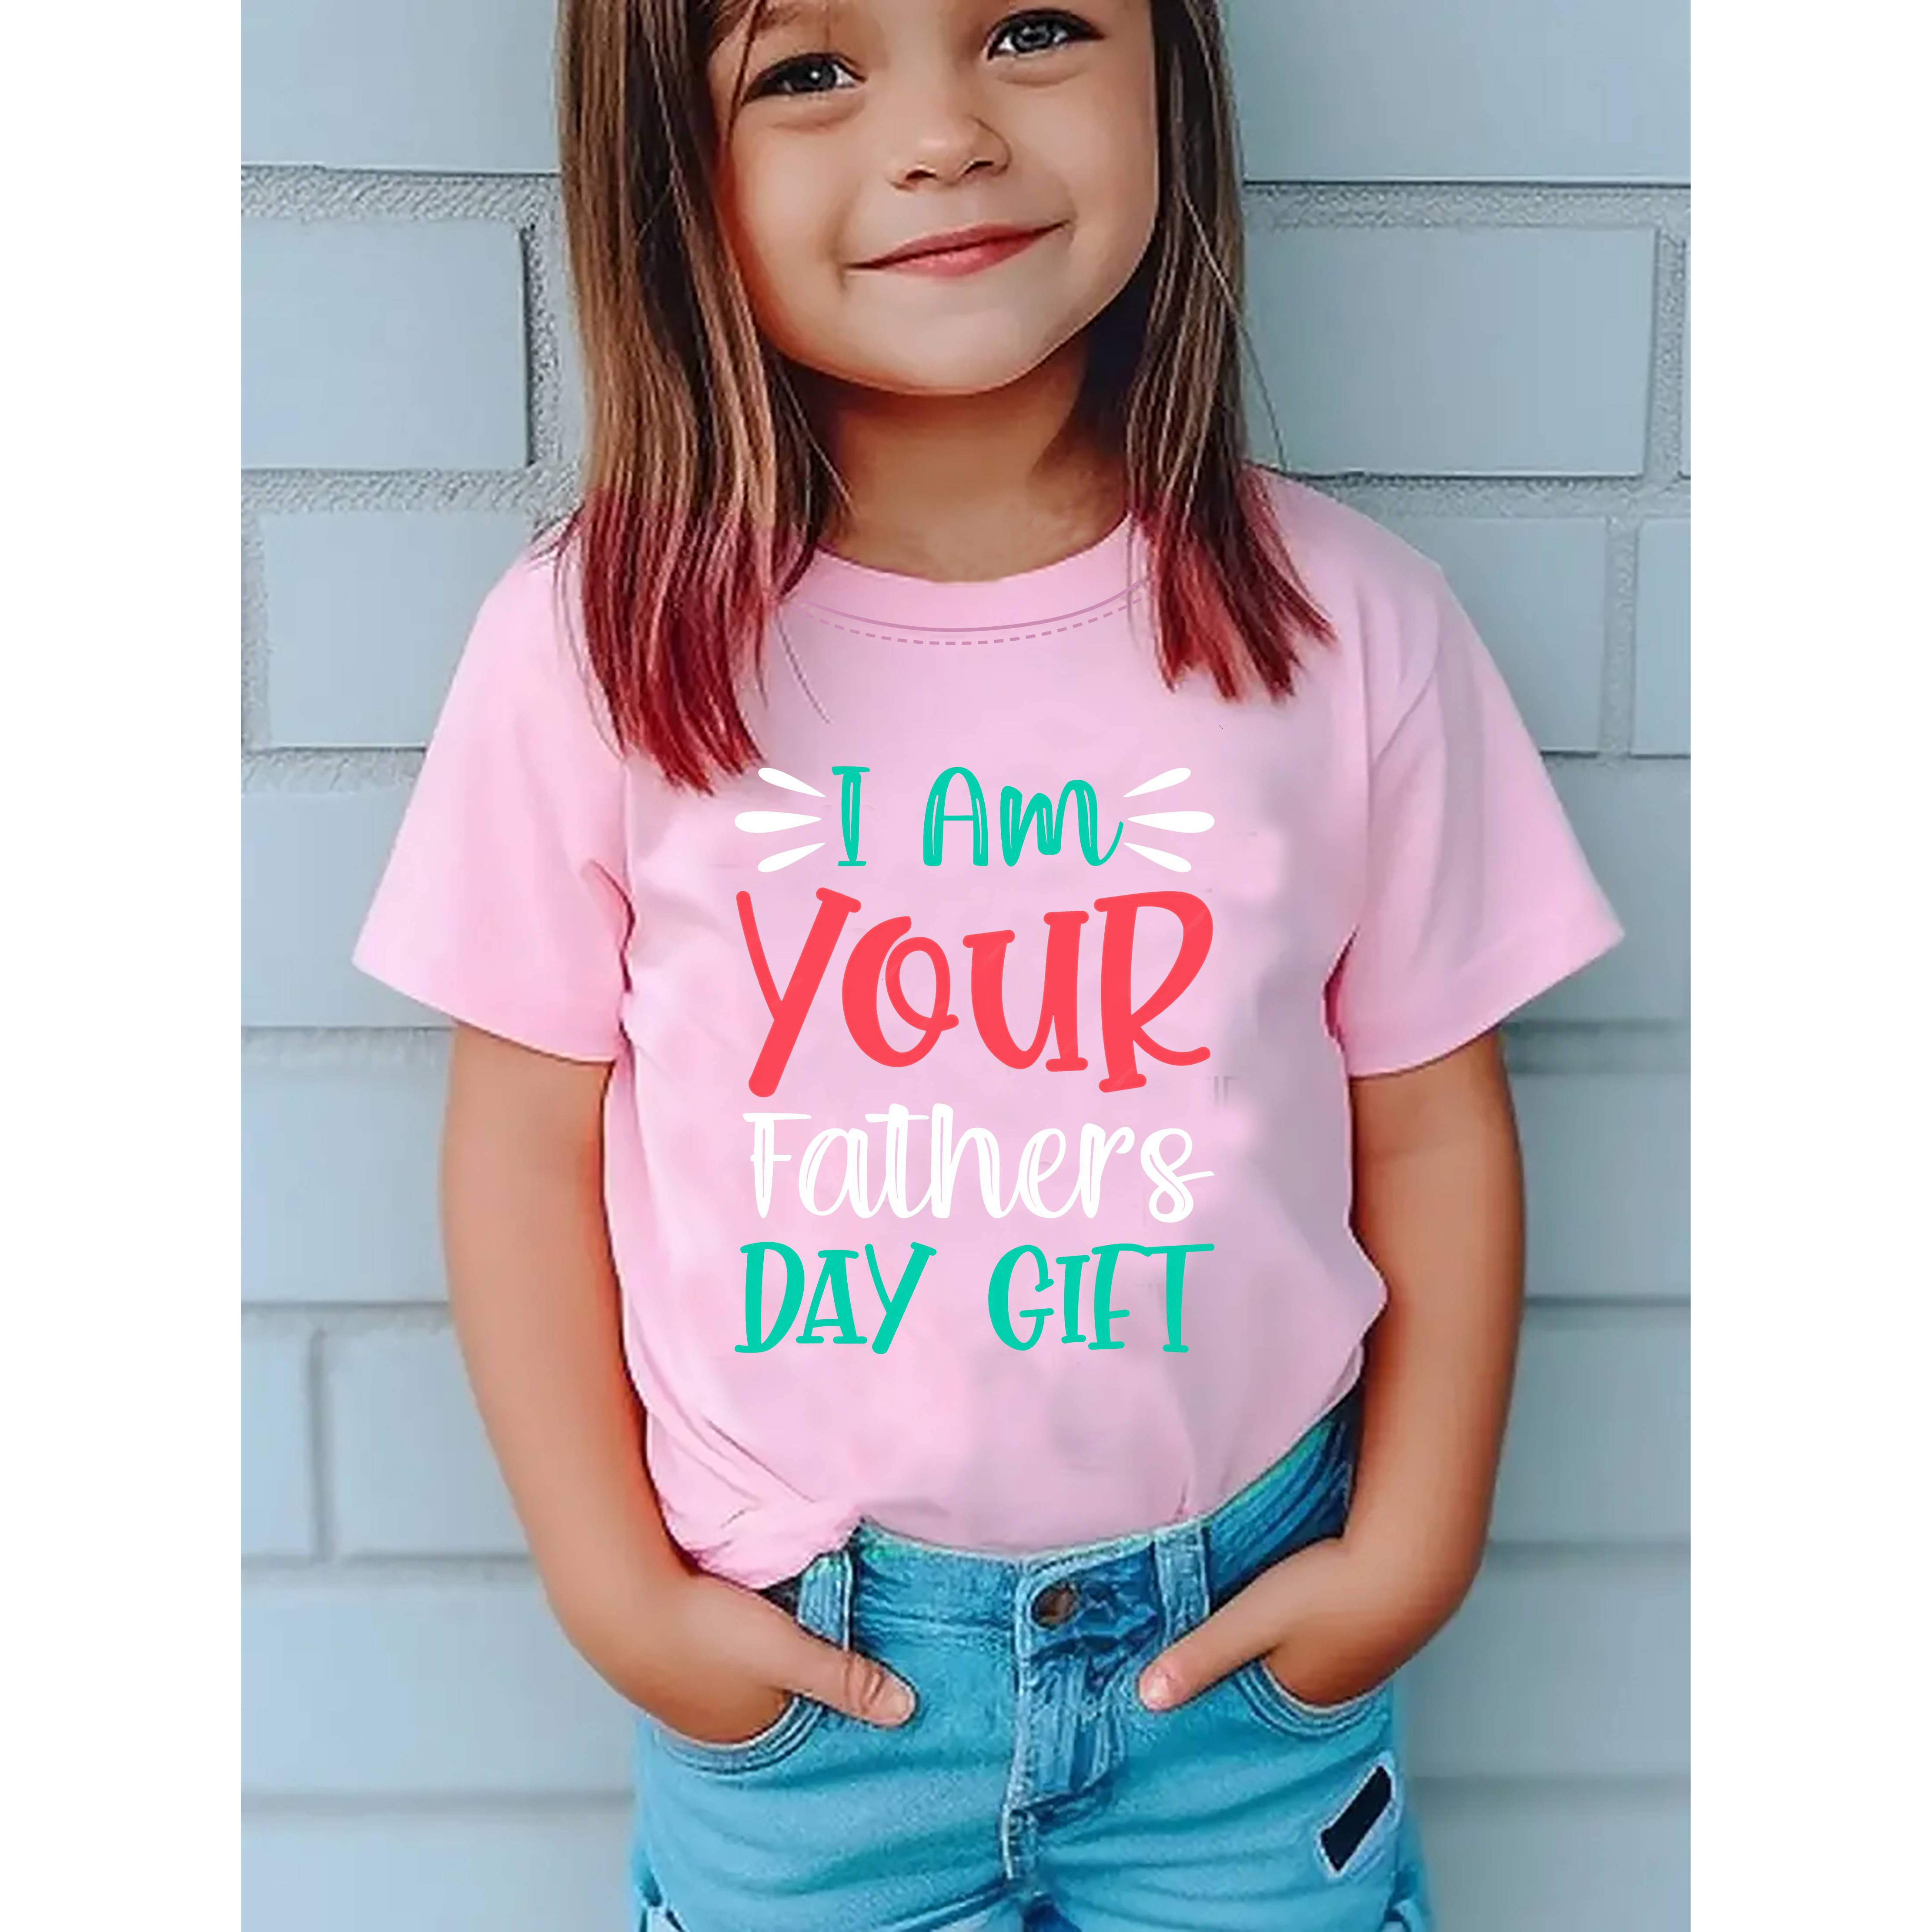 

I Am Your Father's Day Gift Print, Girls' Casual & Comfy Crew Neck Short Sleeve Tee For Spring & Summer, Girls' Clothes For Everyday Activities & Father's Day